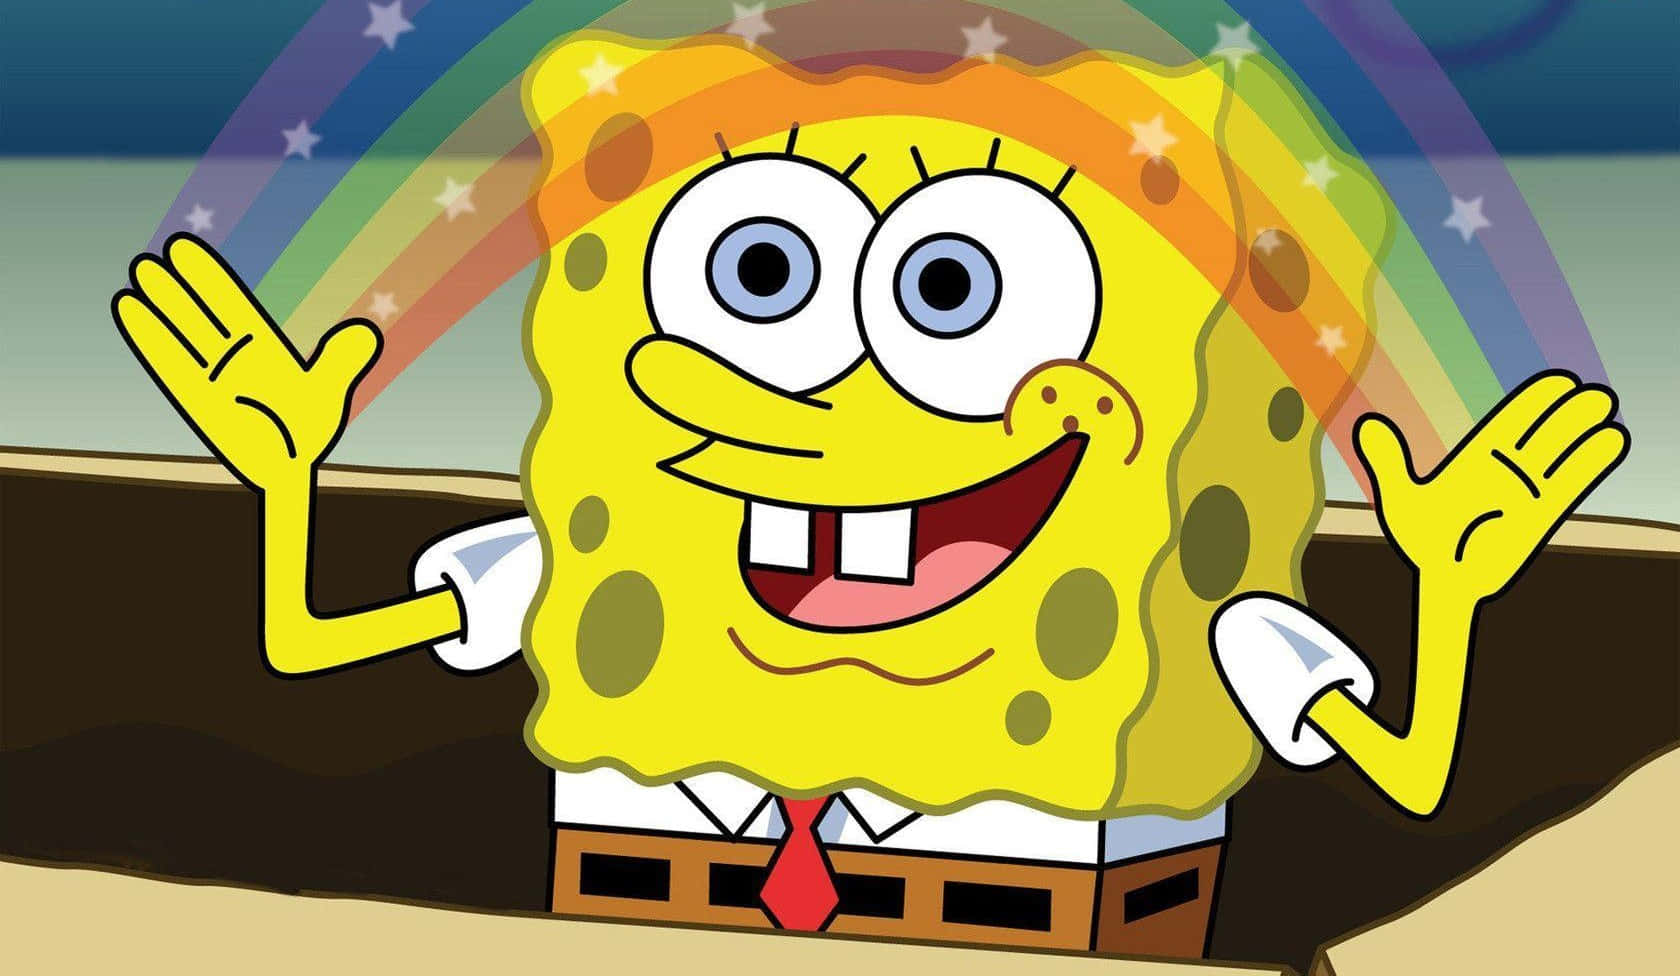 "A smile from SpongeBob SquarePants that always brightens your day!"